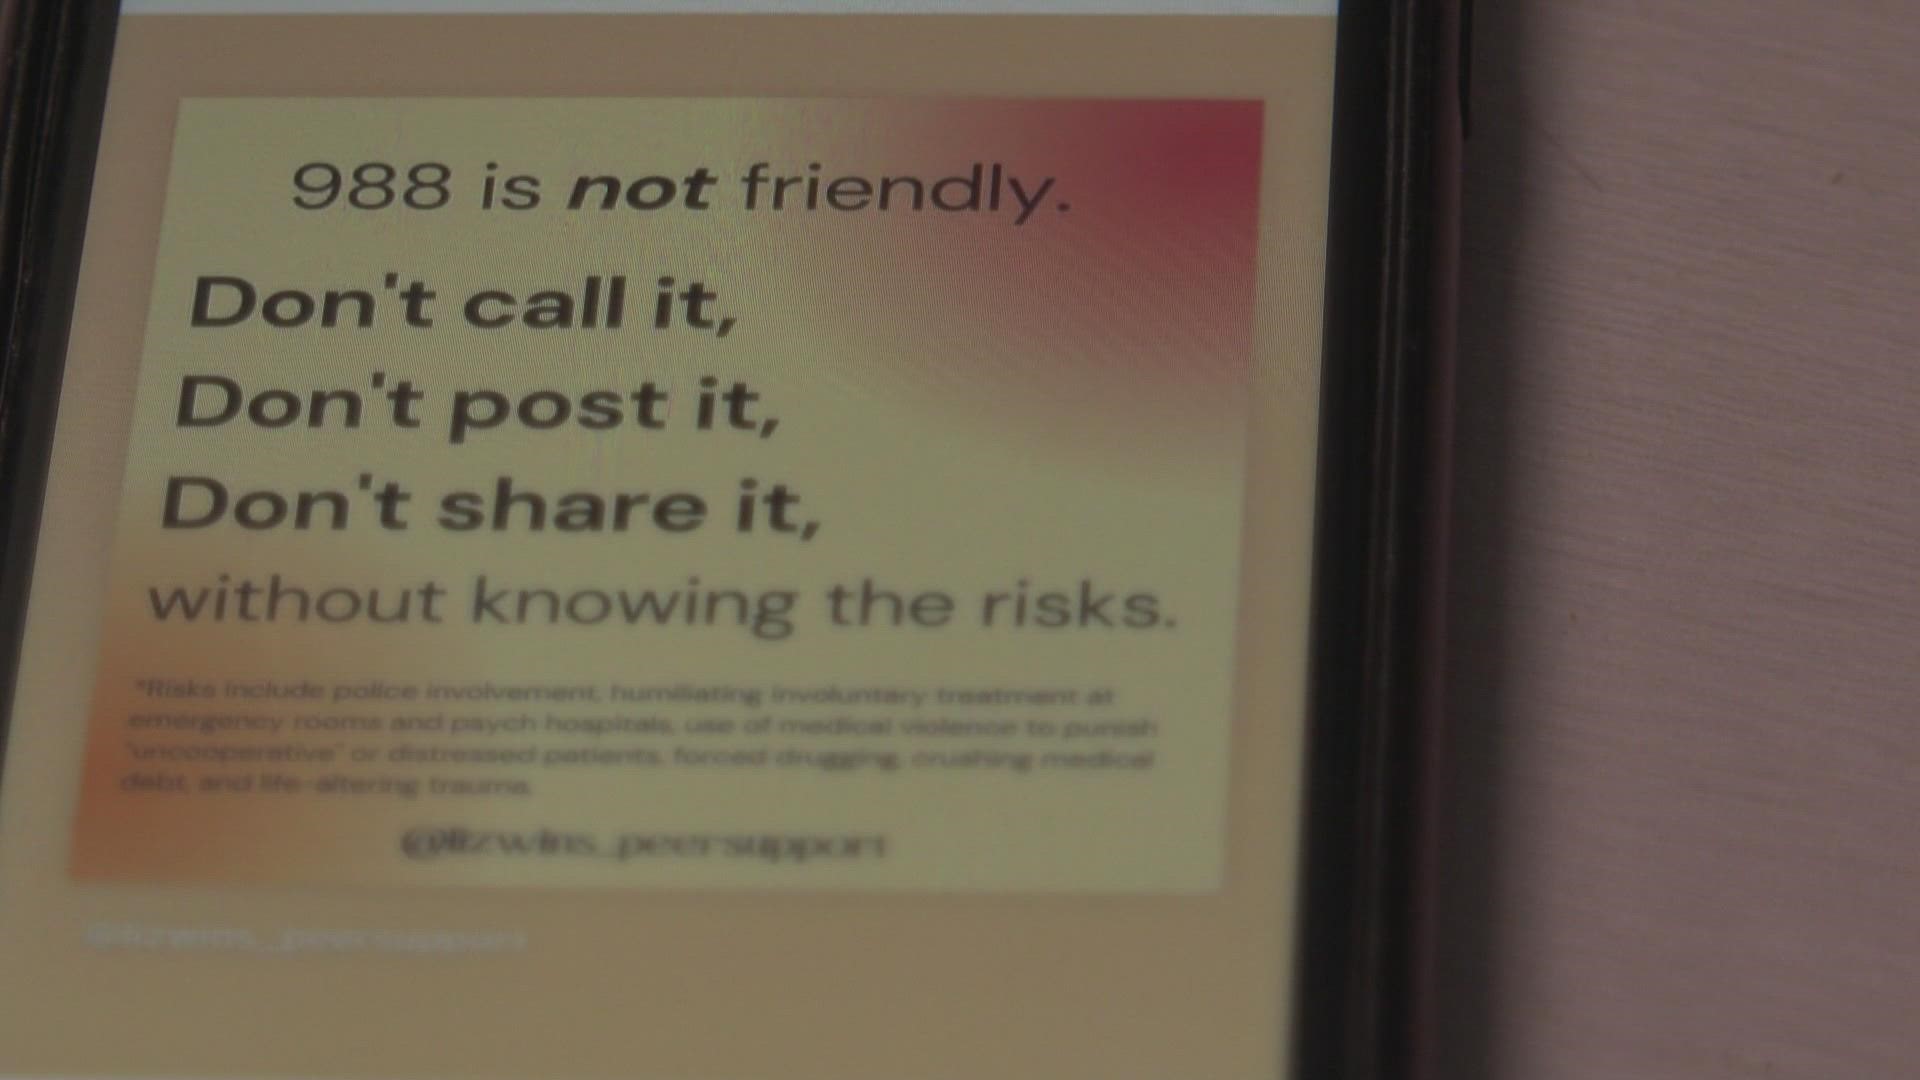 Infographics saying 988 is not friendly are gaining traction on social media. Colorado's provider of the hotline says that's not true in this state.